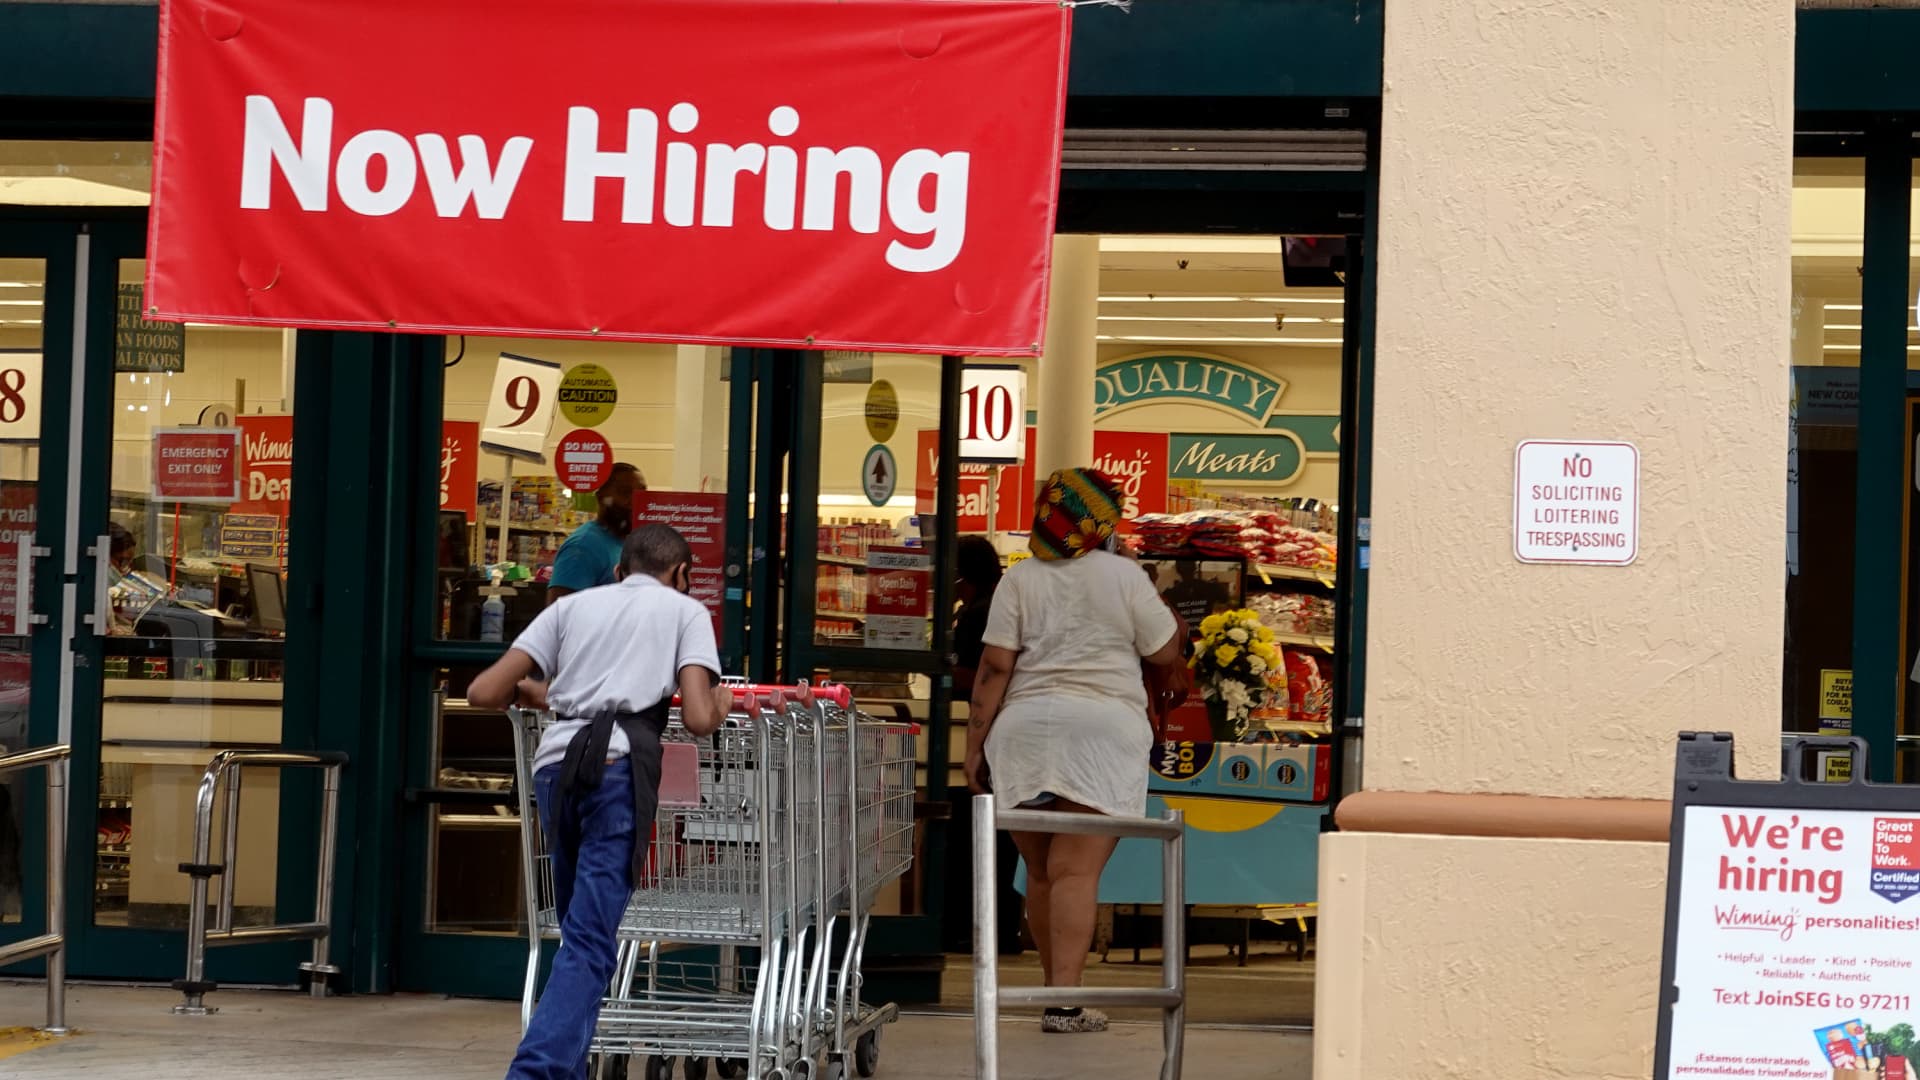 A Now Hiring sign hangs near the entrance to a Winn-Dixie Supermarket on September 21, 2021 in Hallandale, Florida.